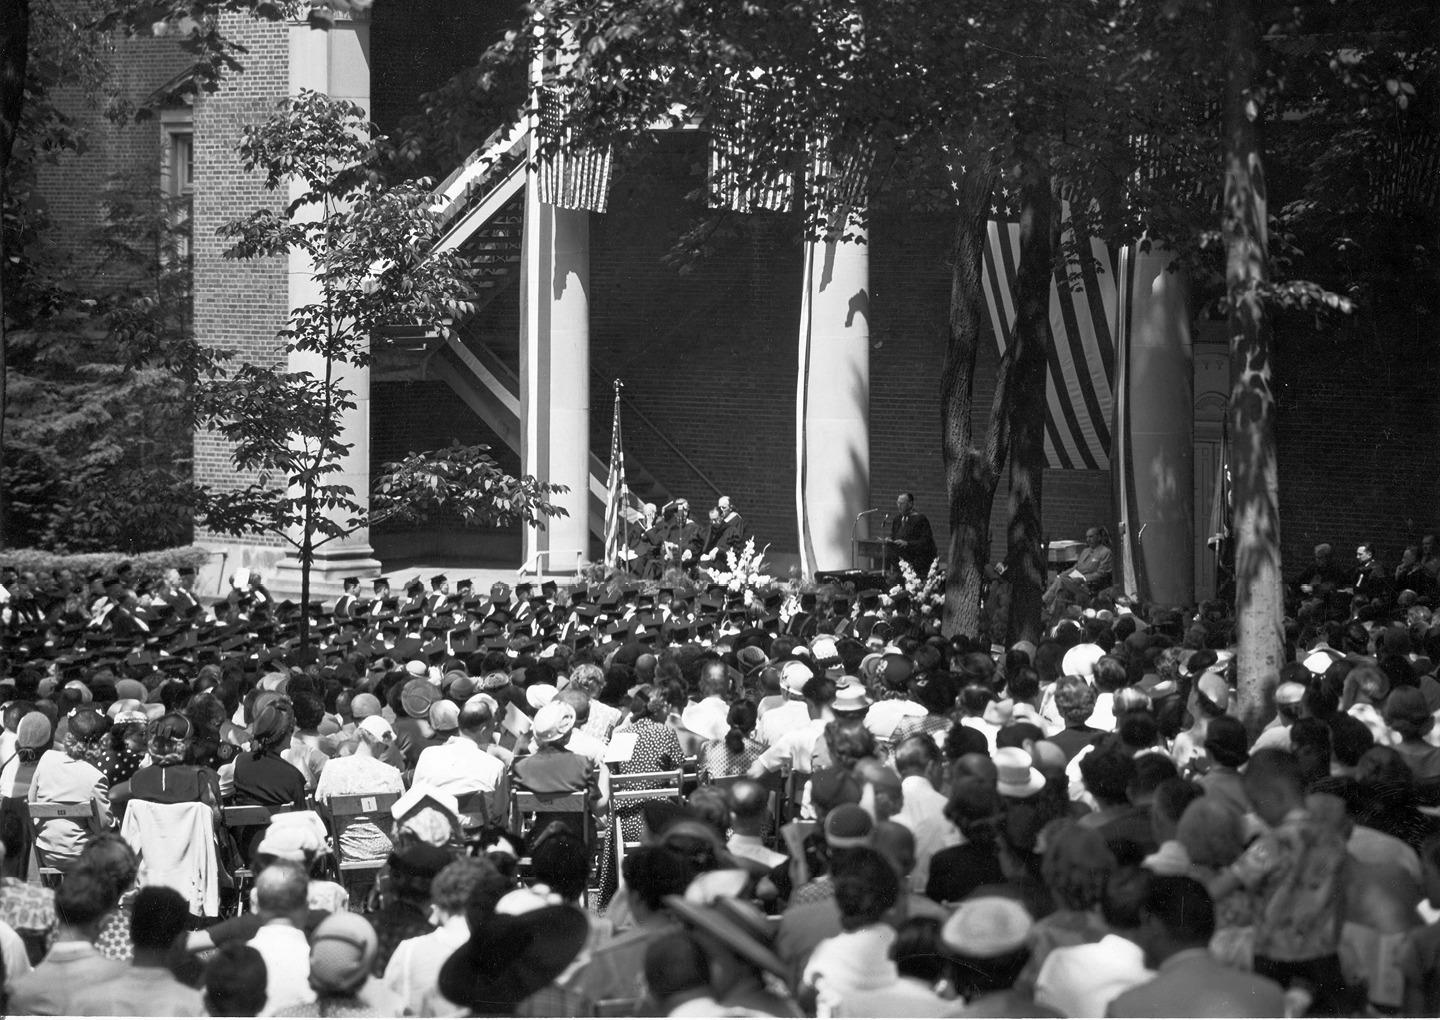 Templeton-Blackburn Alumni Memorial Auditorium’s West Portico hosted many OHIO graduation ceremonies, including the 1949 Summer Commencement pictured here. Photo courtesy of the Mahn Center for Archives and Special Collections